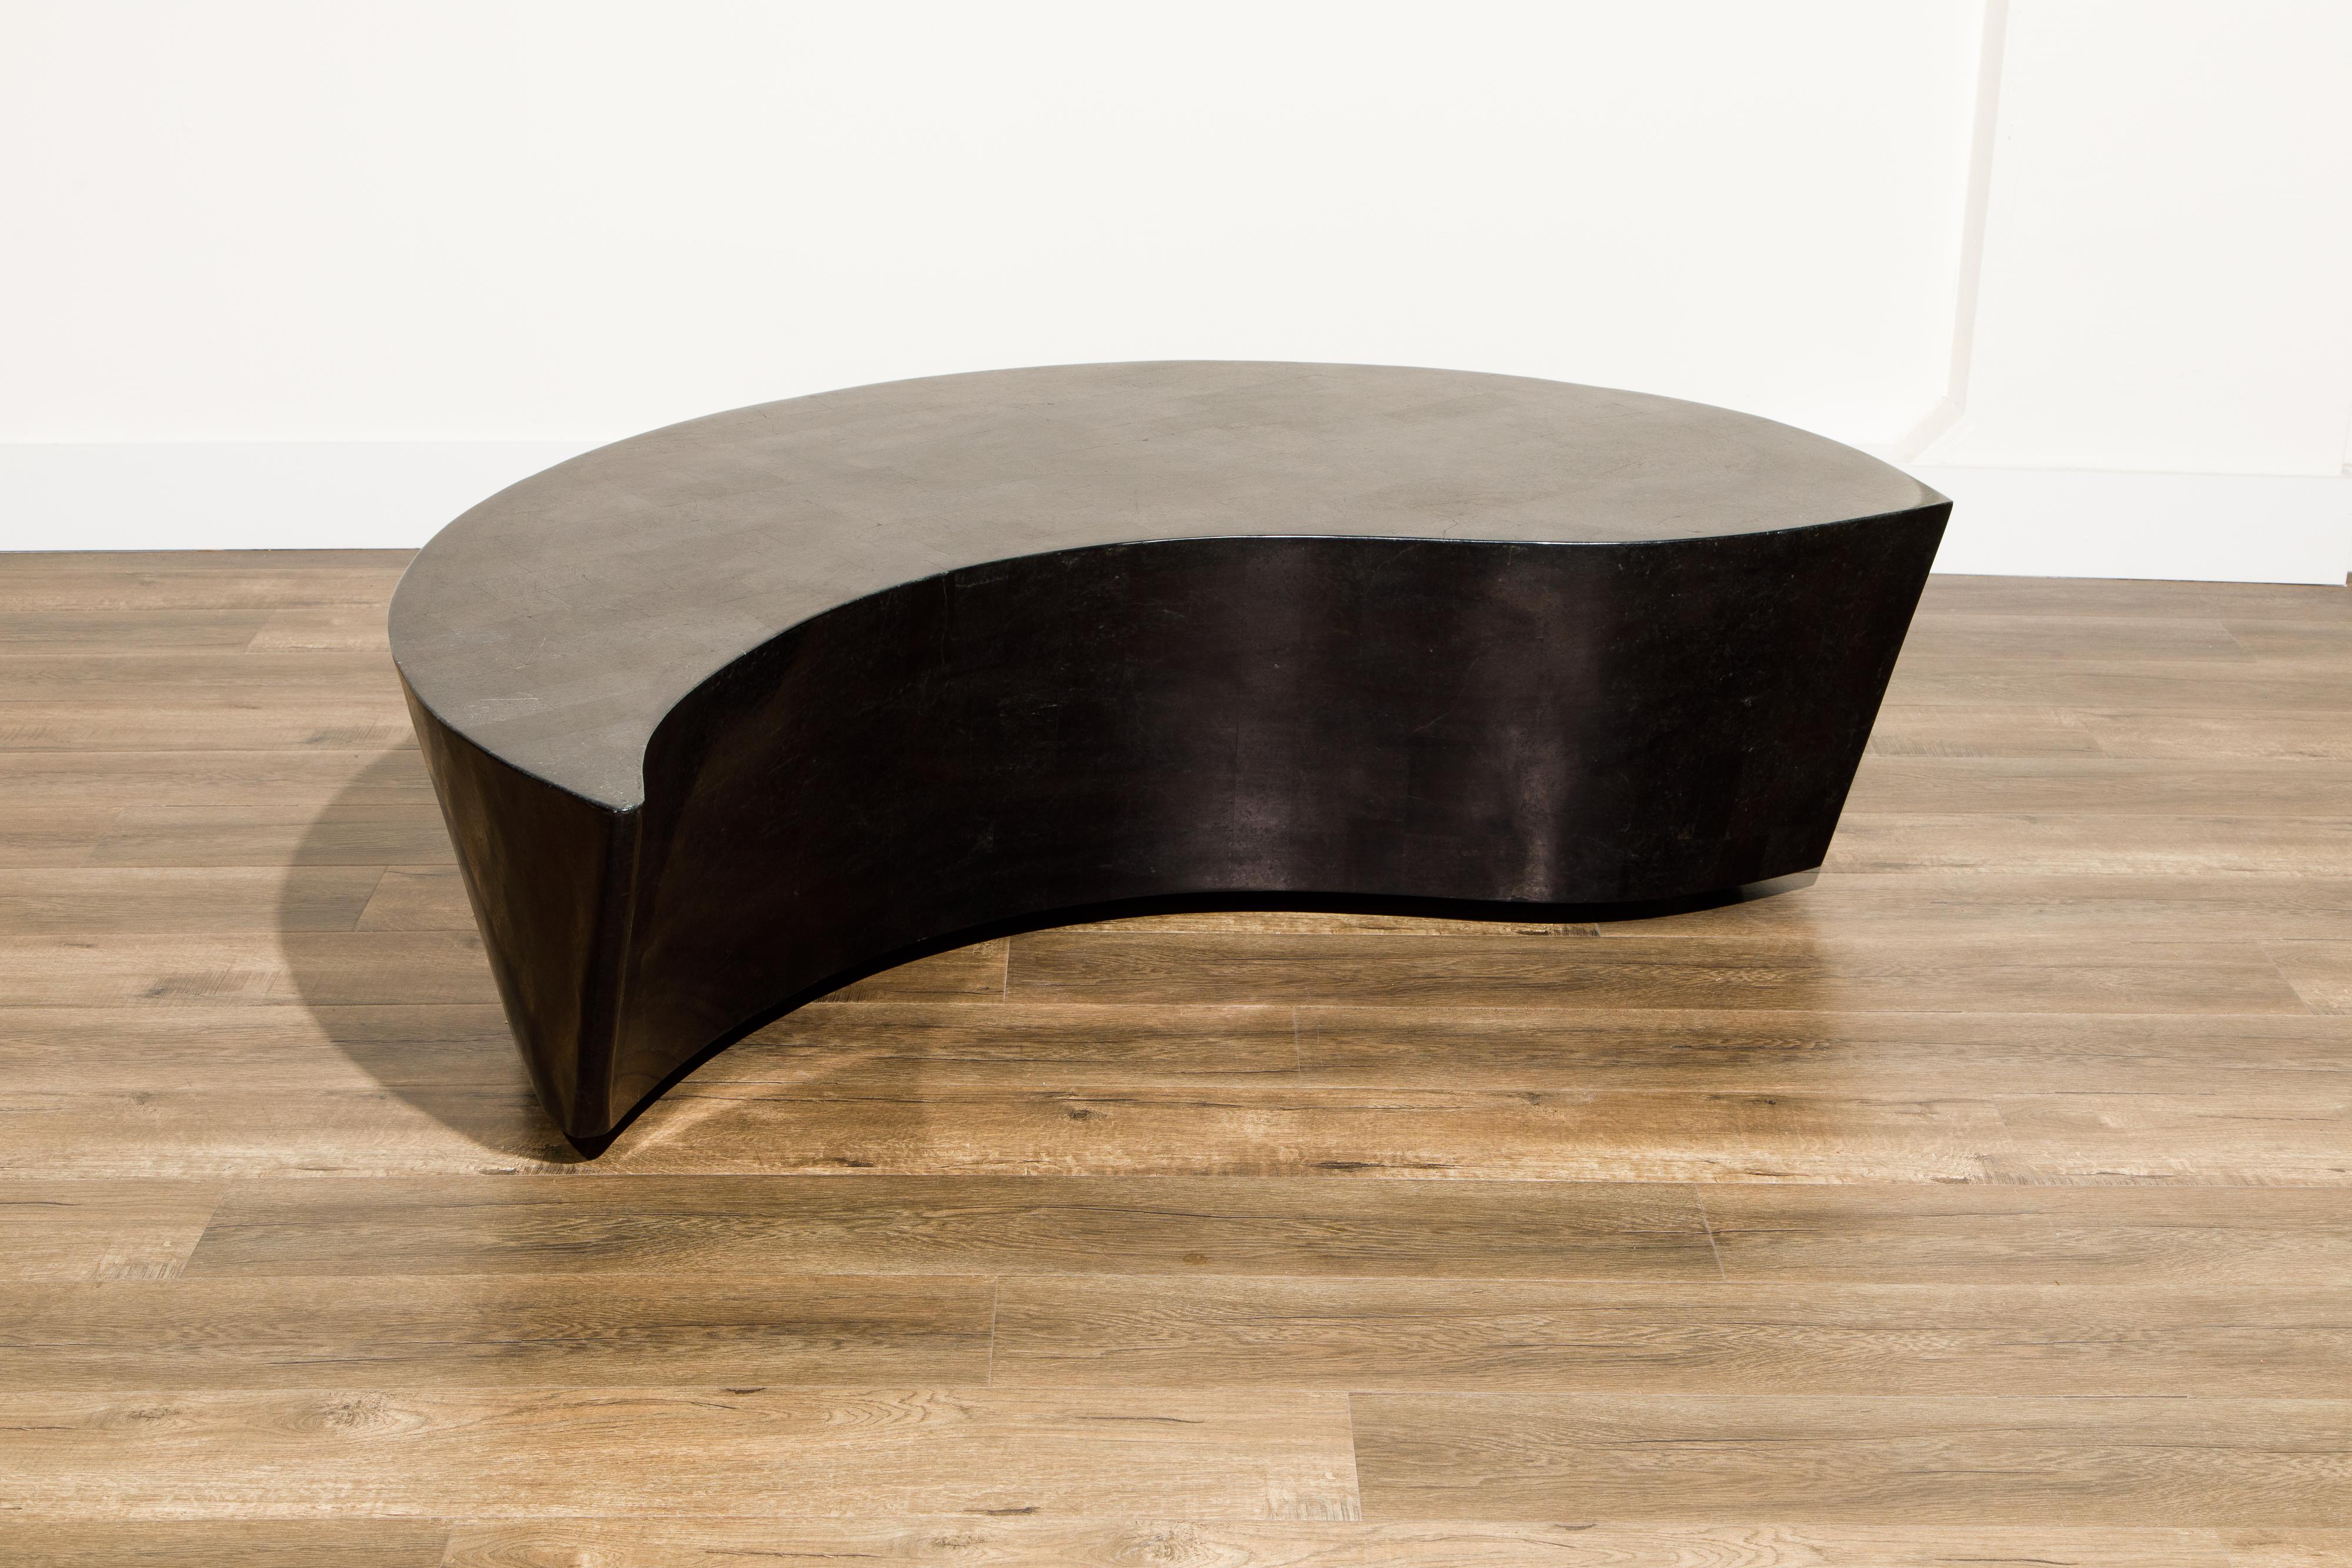 This unique cocktail table is called 'Hampton' by Marquis Collection of Beverly Hills, circa 1990. Constructed with tessellated black stone tiles, this impressive piece would work great with a curved sofa or the Kagan 'Cloud' sofa and can be placed